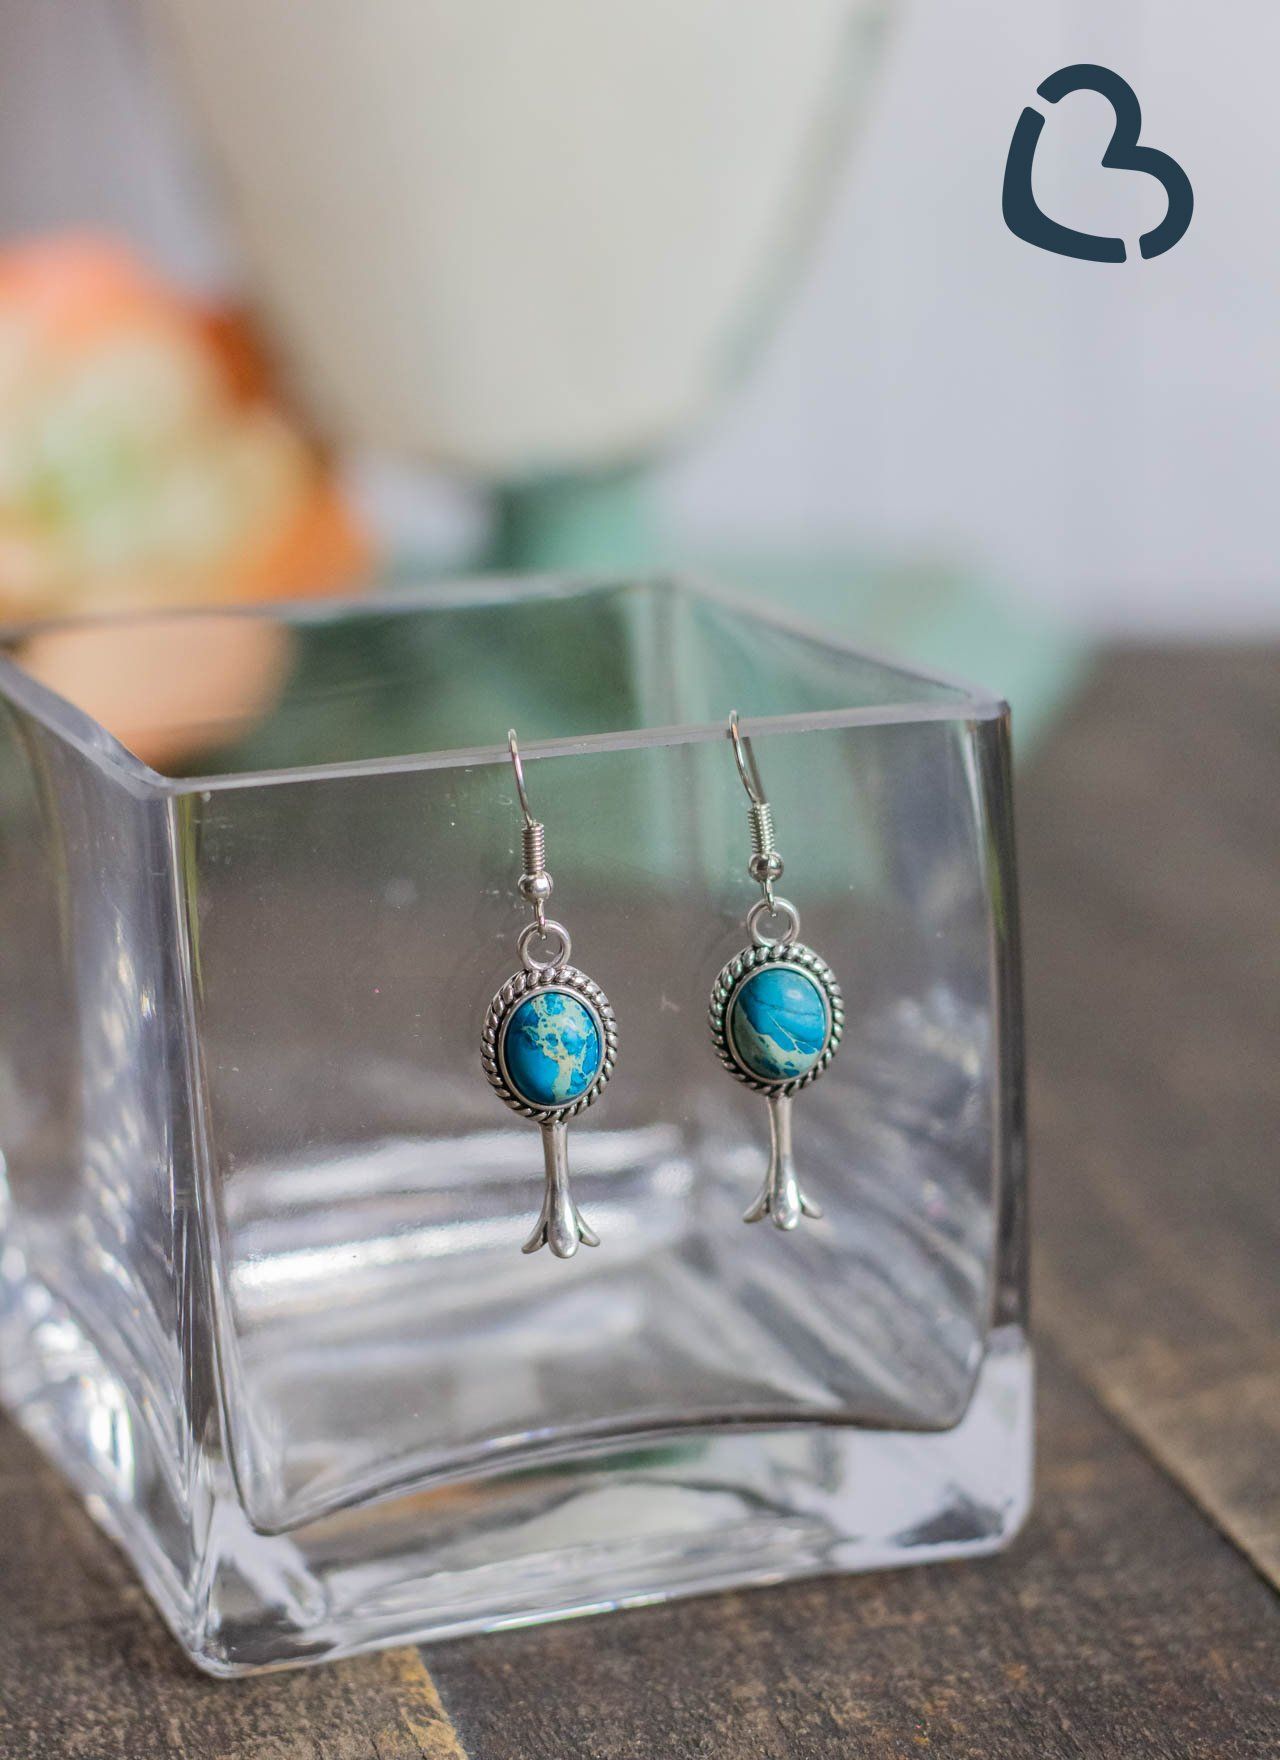 The Callahan Squash Blossom Earrings in Mosaic Turquoises Jewelry 18 